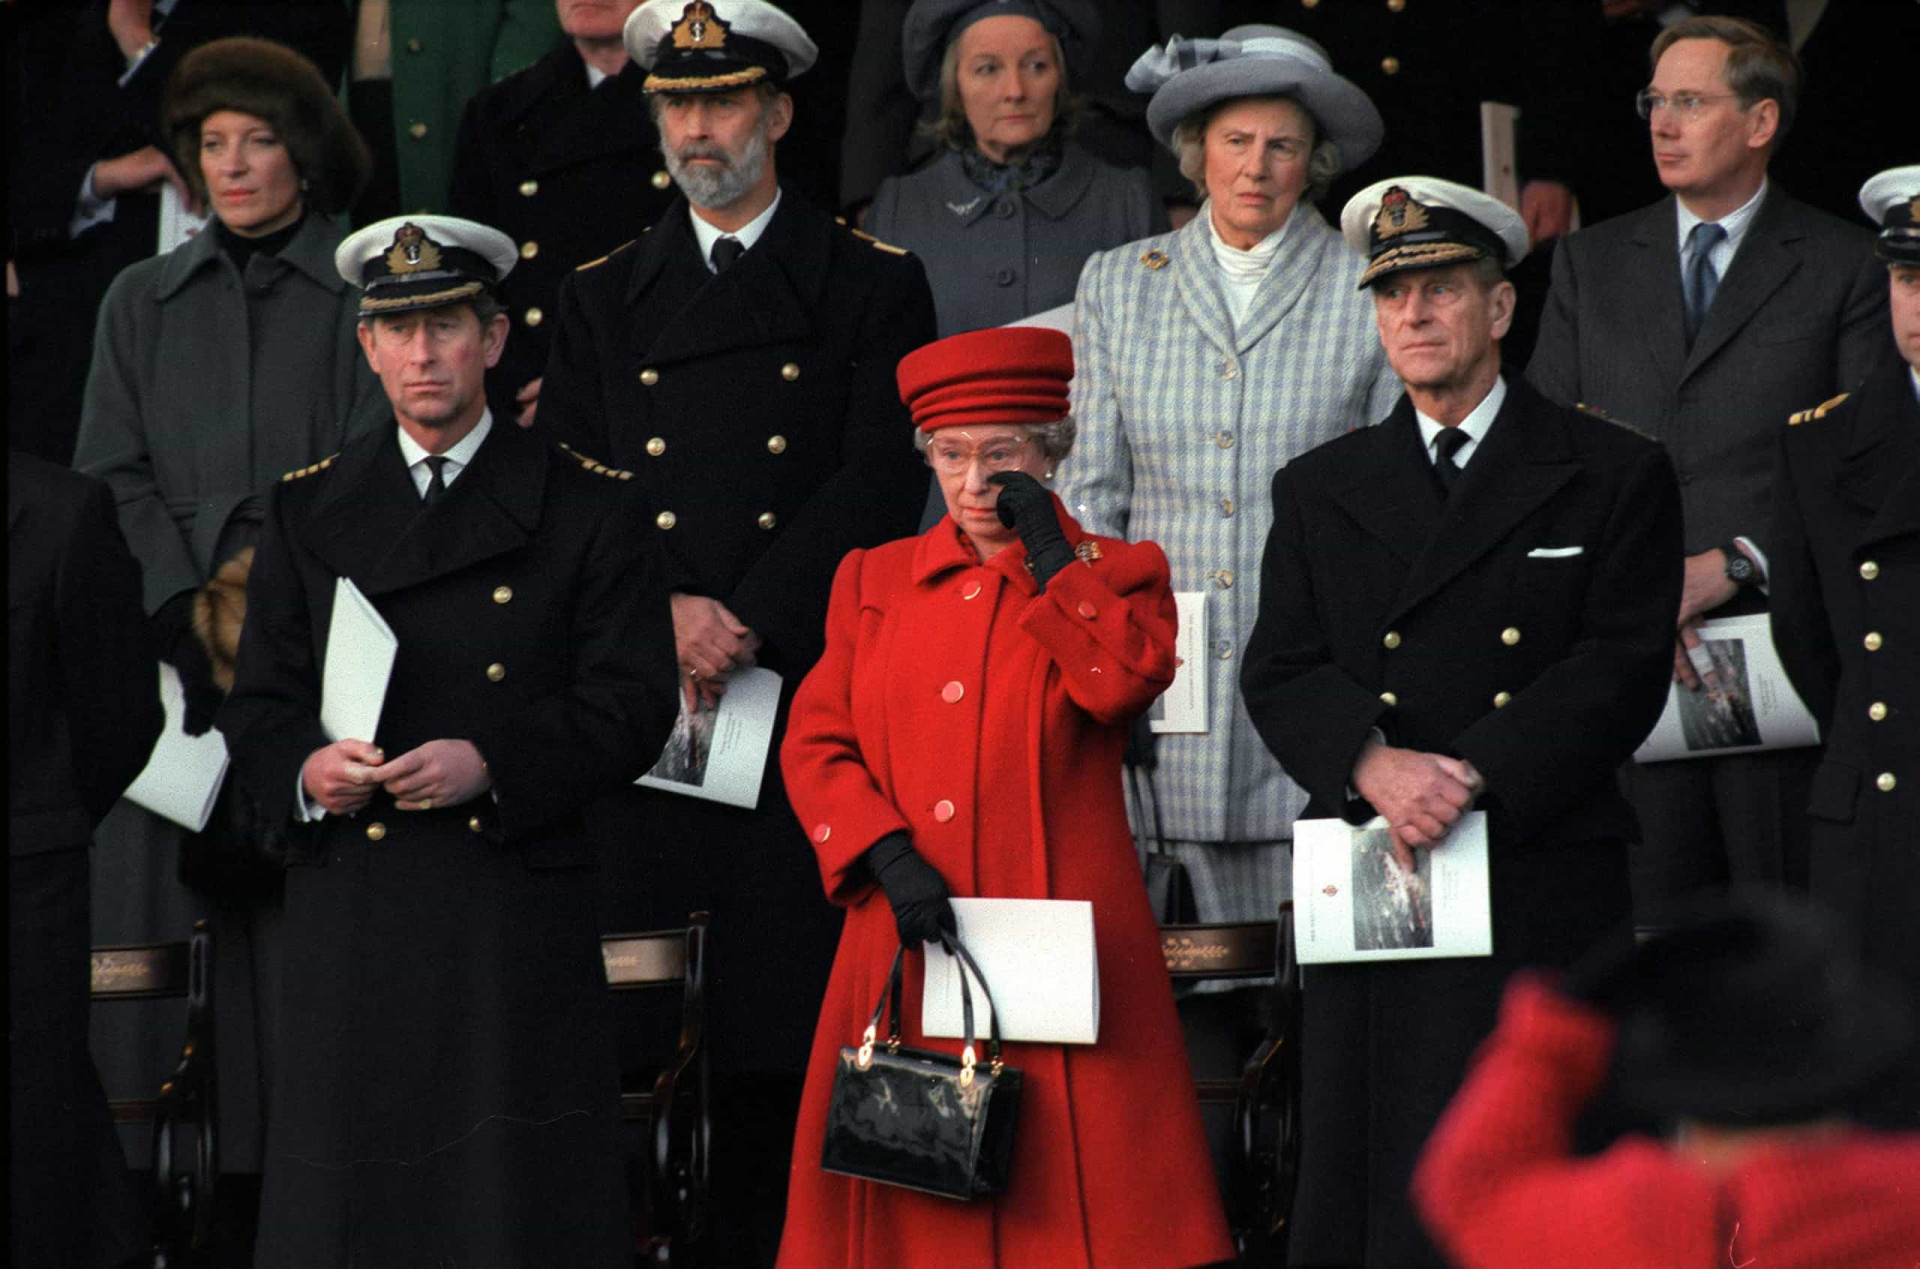 <p>On December 11, 1997, after 44 years in royal service, Britannia was retired from the seas. The late Queen, normally undemonstrative, was seen wiping away a tear during the decommissioning service, which was also attended by Prince Philip and Prince Charles.</p><p><a href="https://www.msn.com/en-ph/community/channel/vid-7xx8mnucu55yw63we9va2gwr7uihbxwc68fxqp25x6tg4ftibpra?cvid=94631541bc0f4f89bfd59158d696ad7e">Follow us and access great exclusive content every day</a></p>